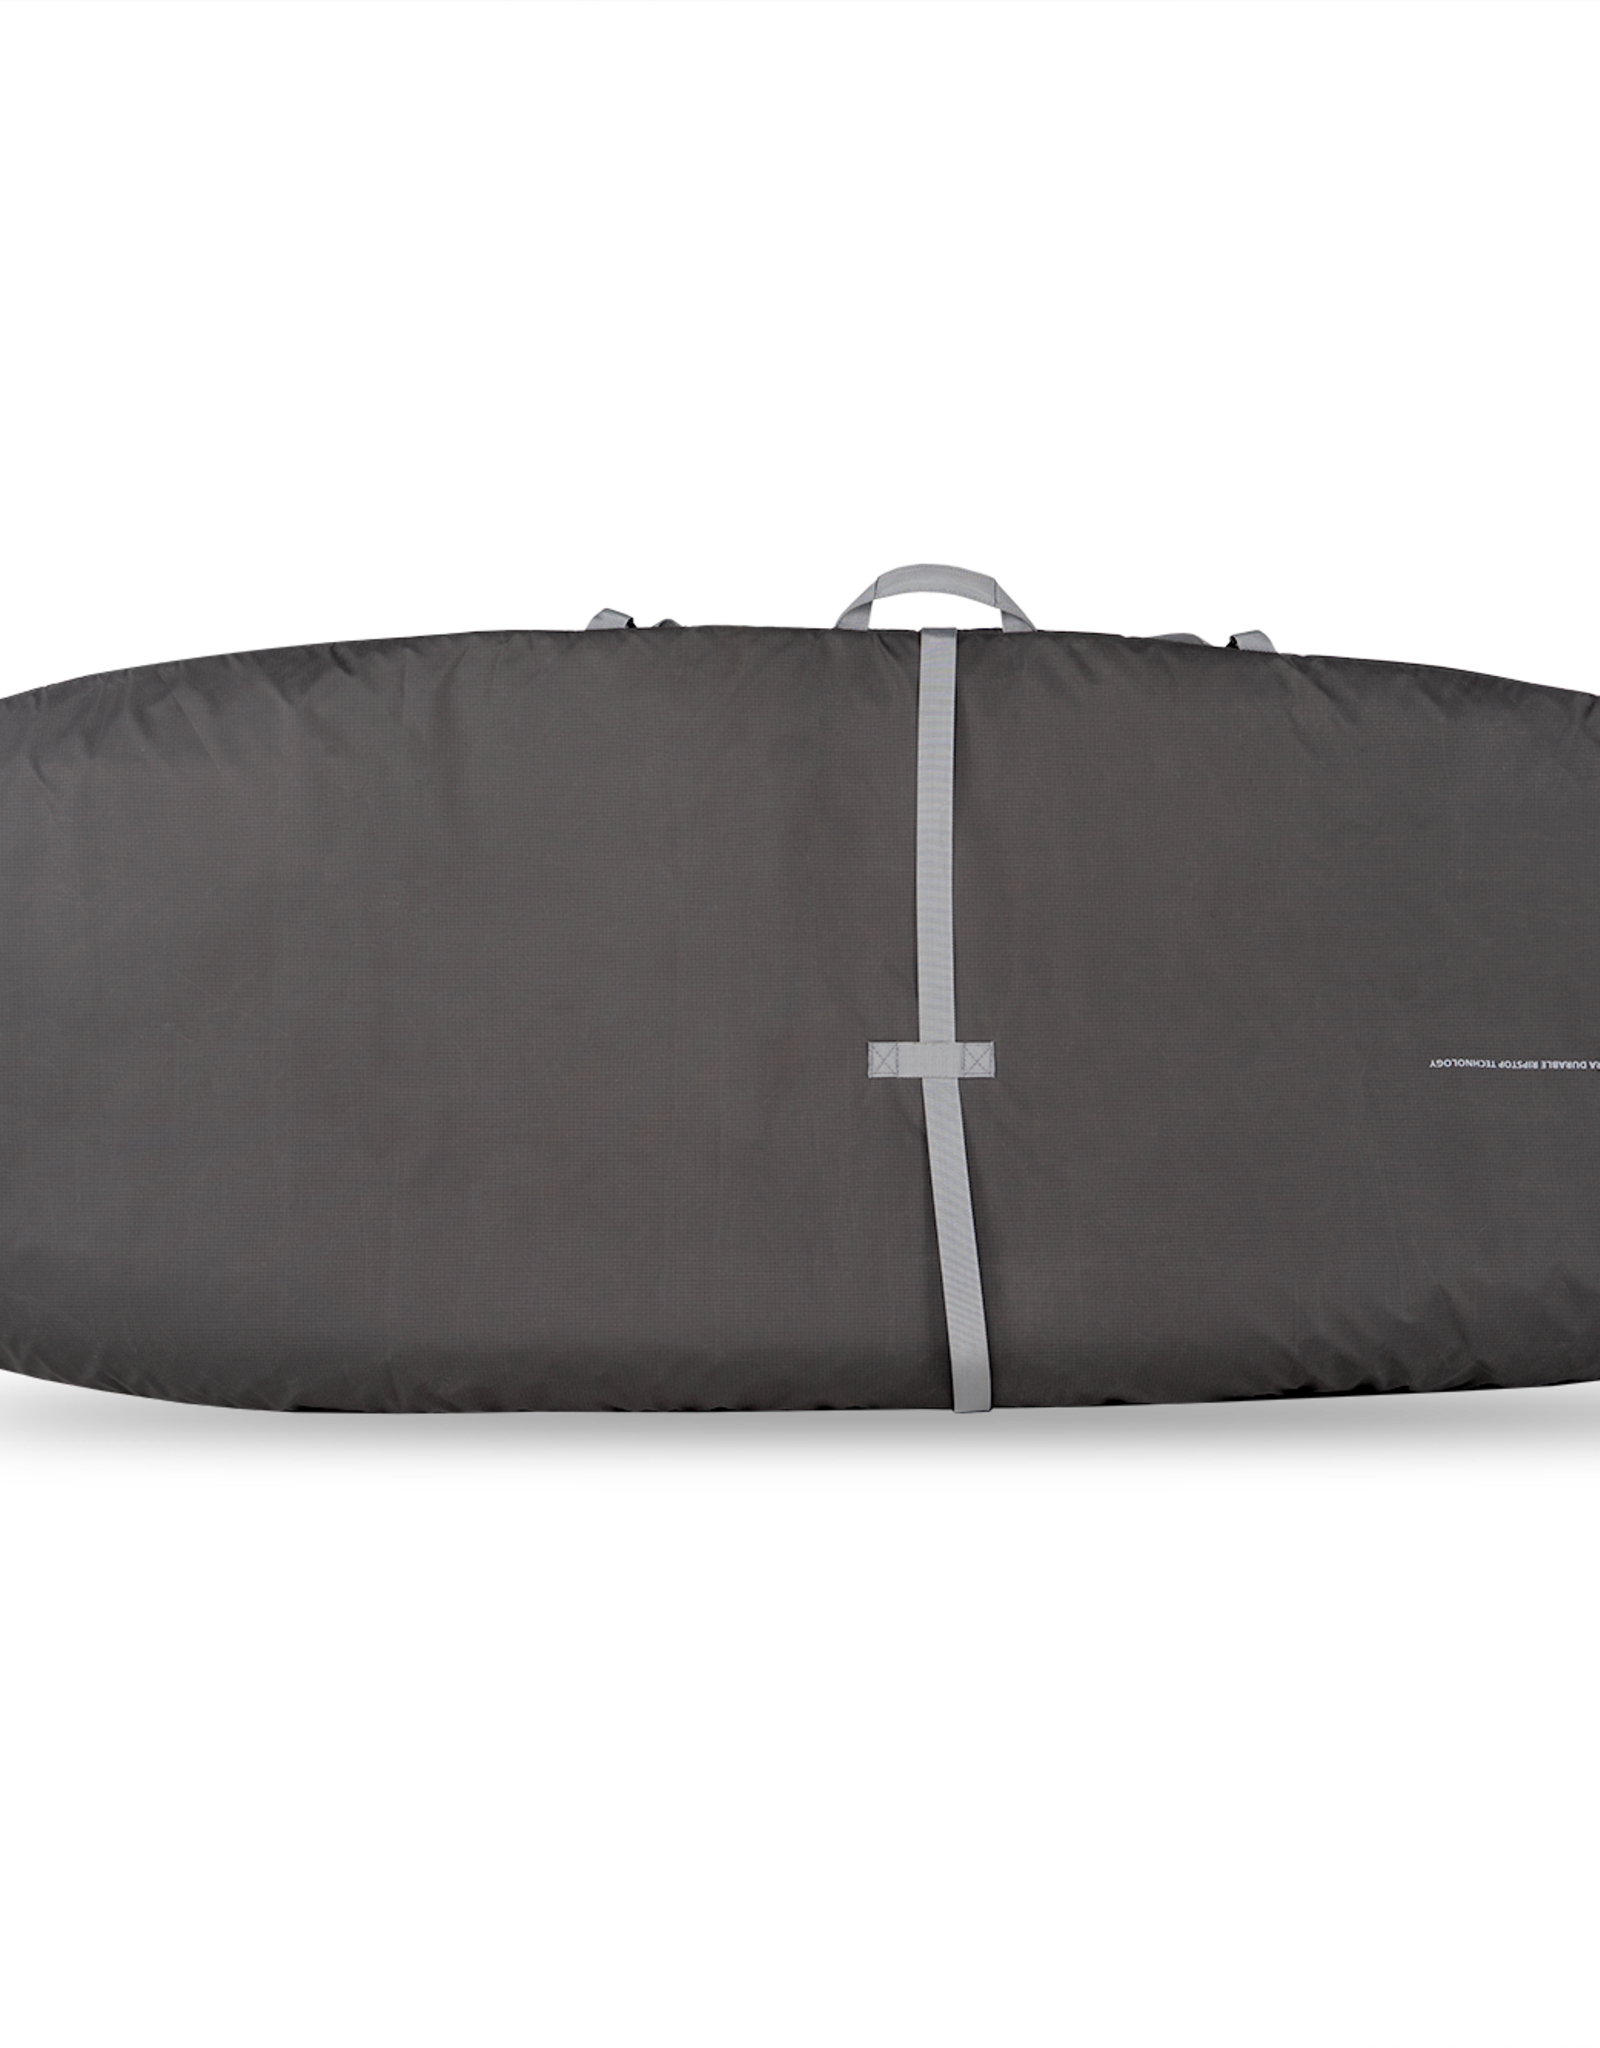 Starboard 2024 STARBOARD SUP BAG 7' 4" - 7' 5" X 27" PRO/SPICE